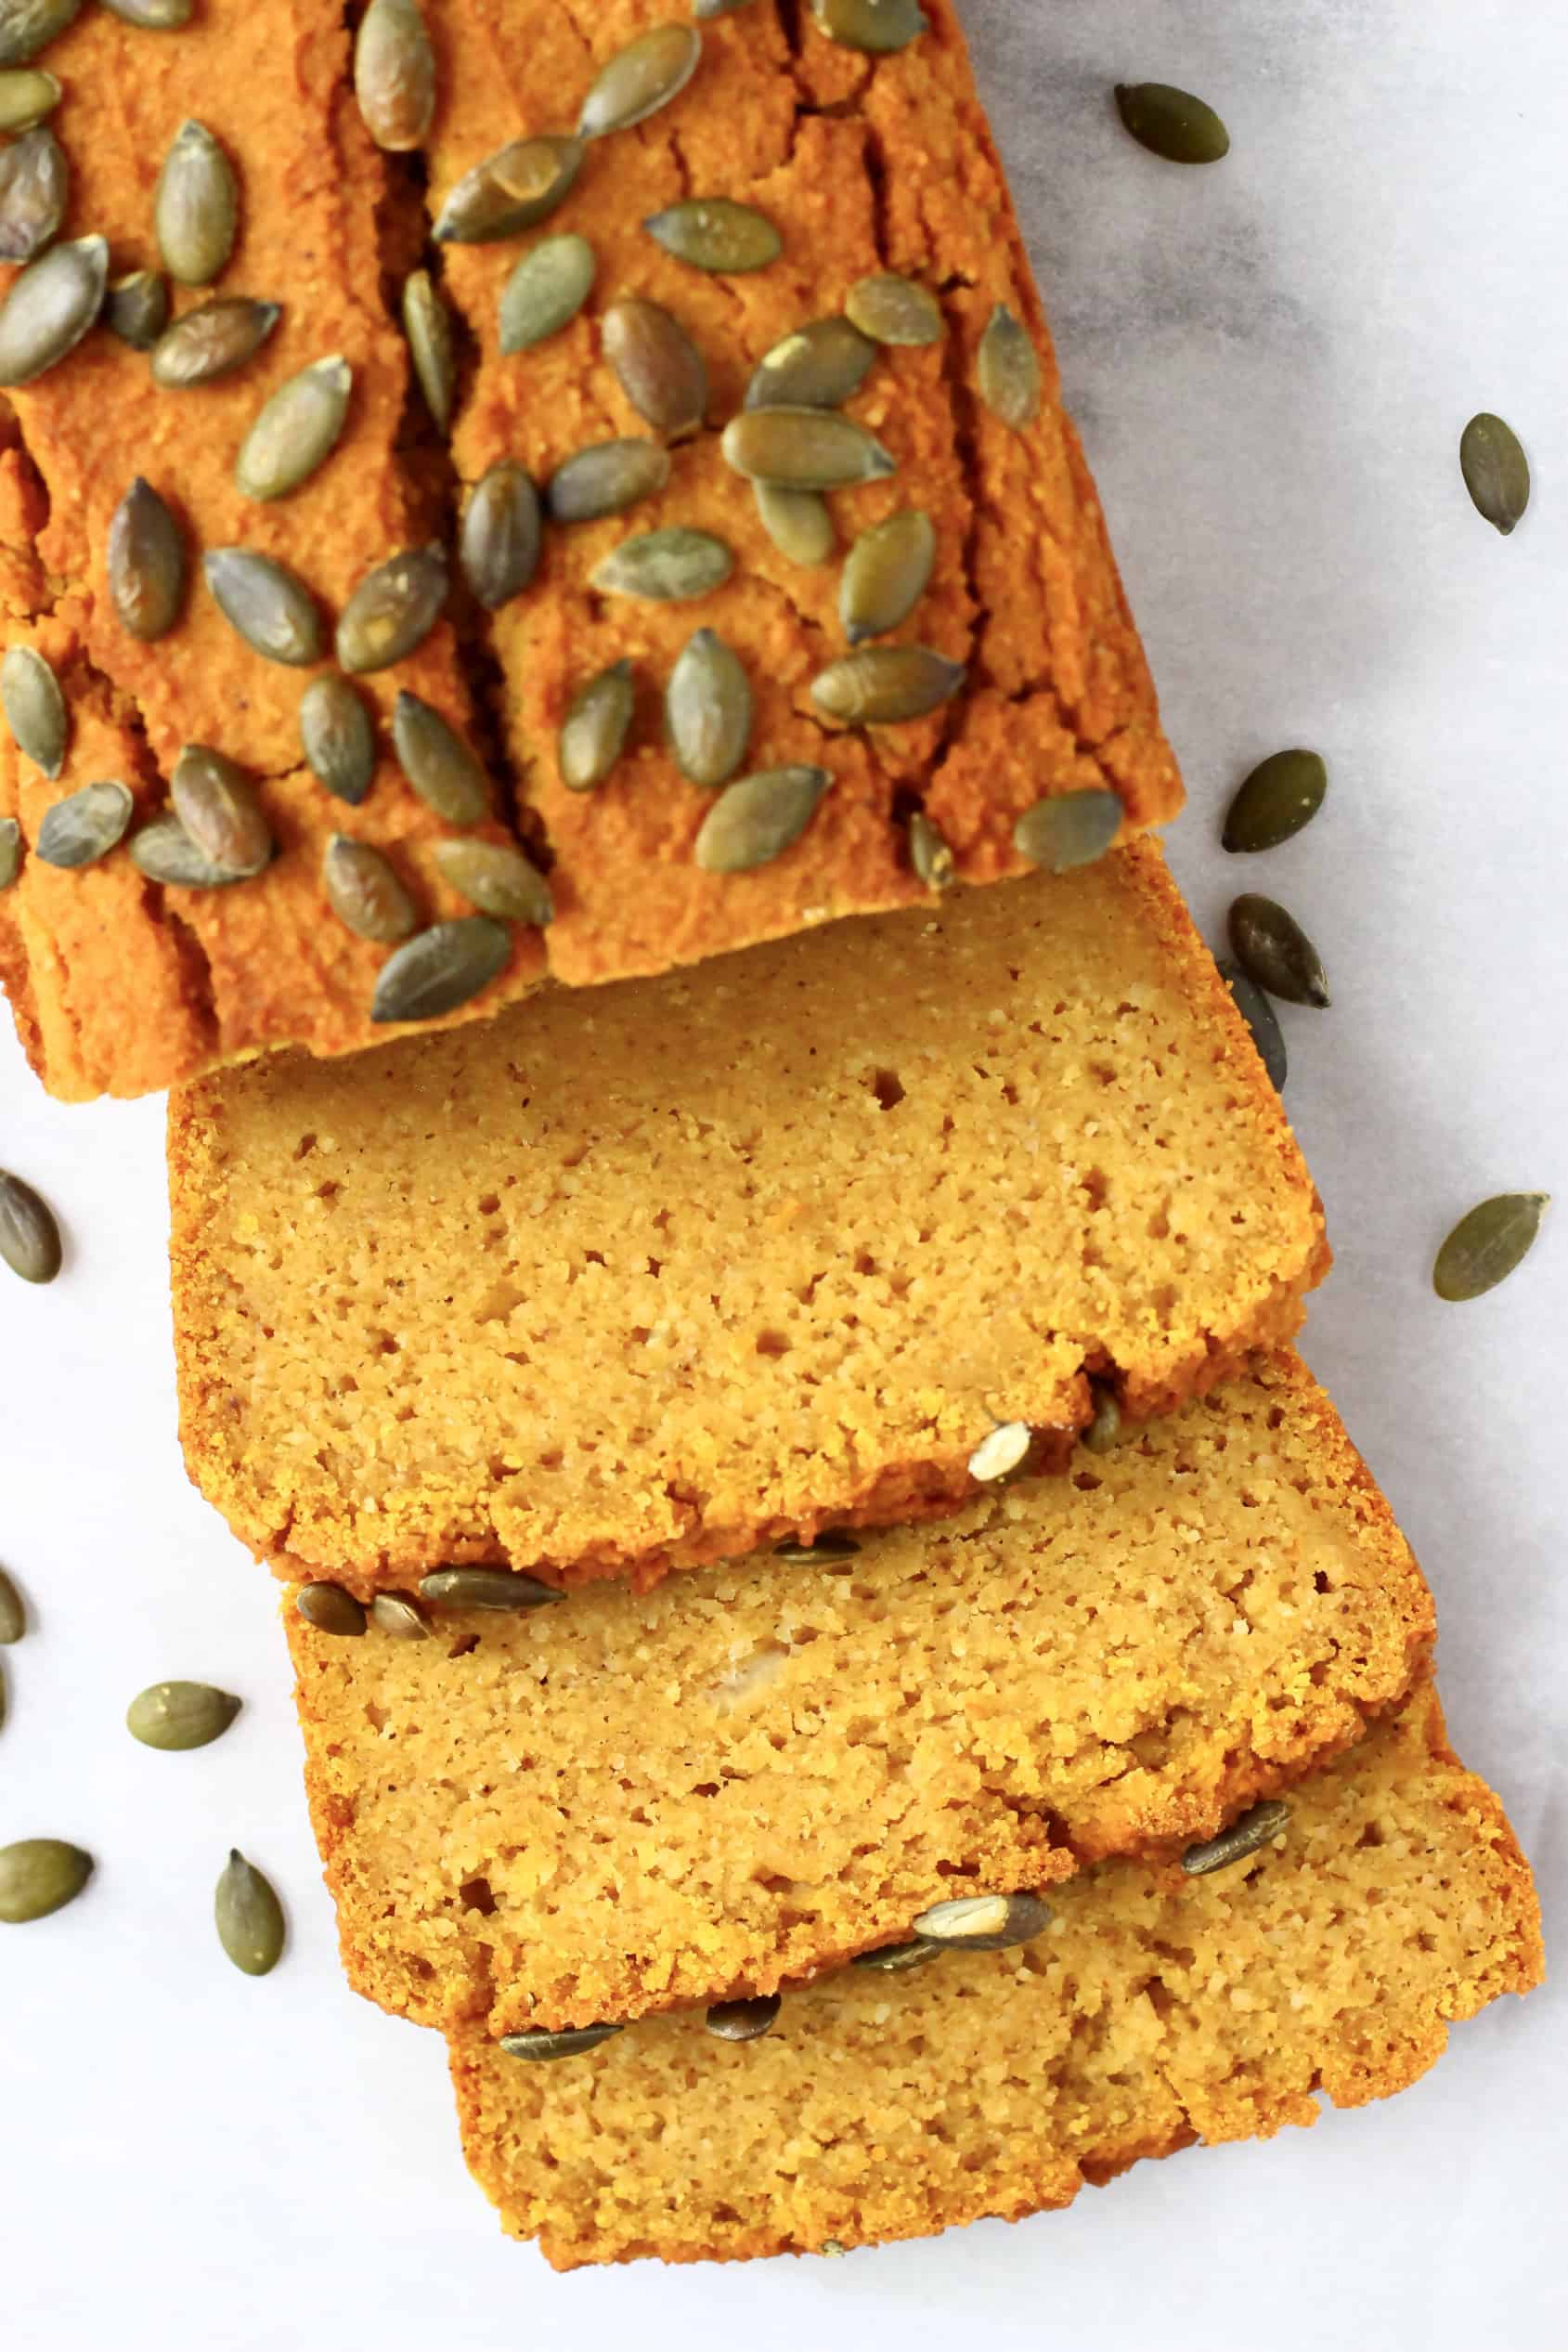 A loaf of gluten-free vegan pumpkin bread with three slices next to it